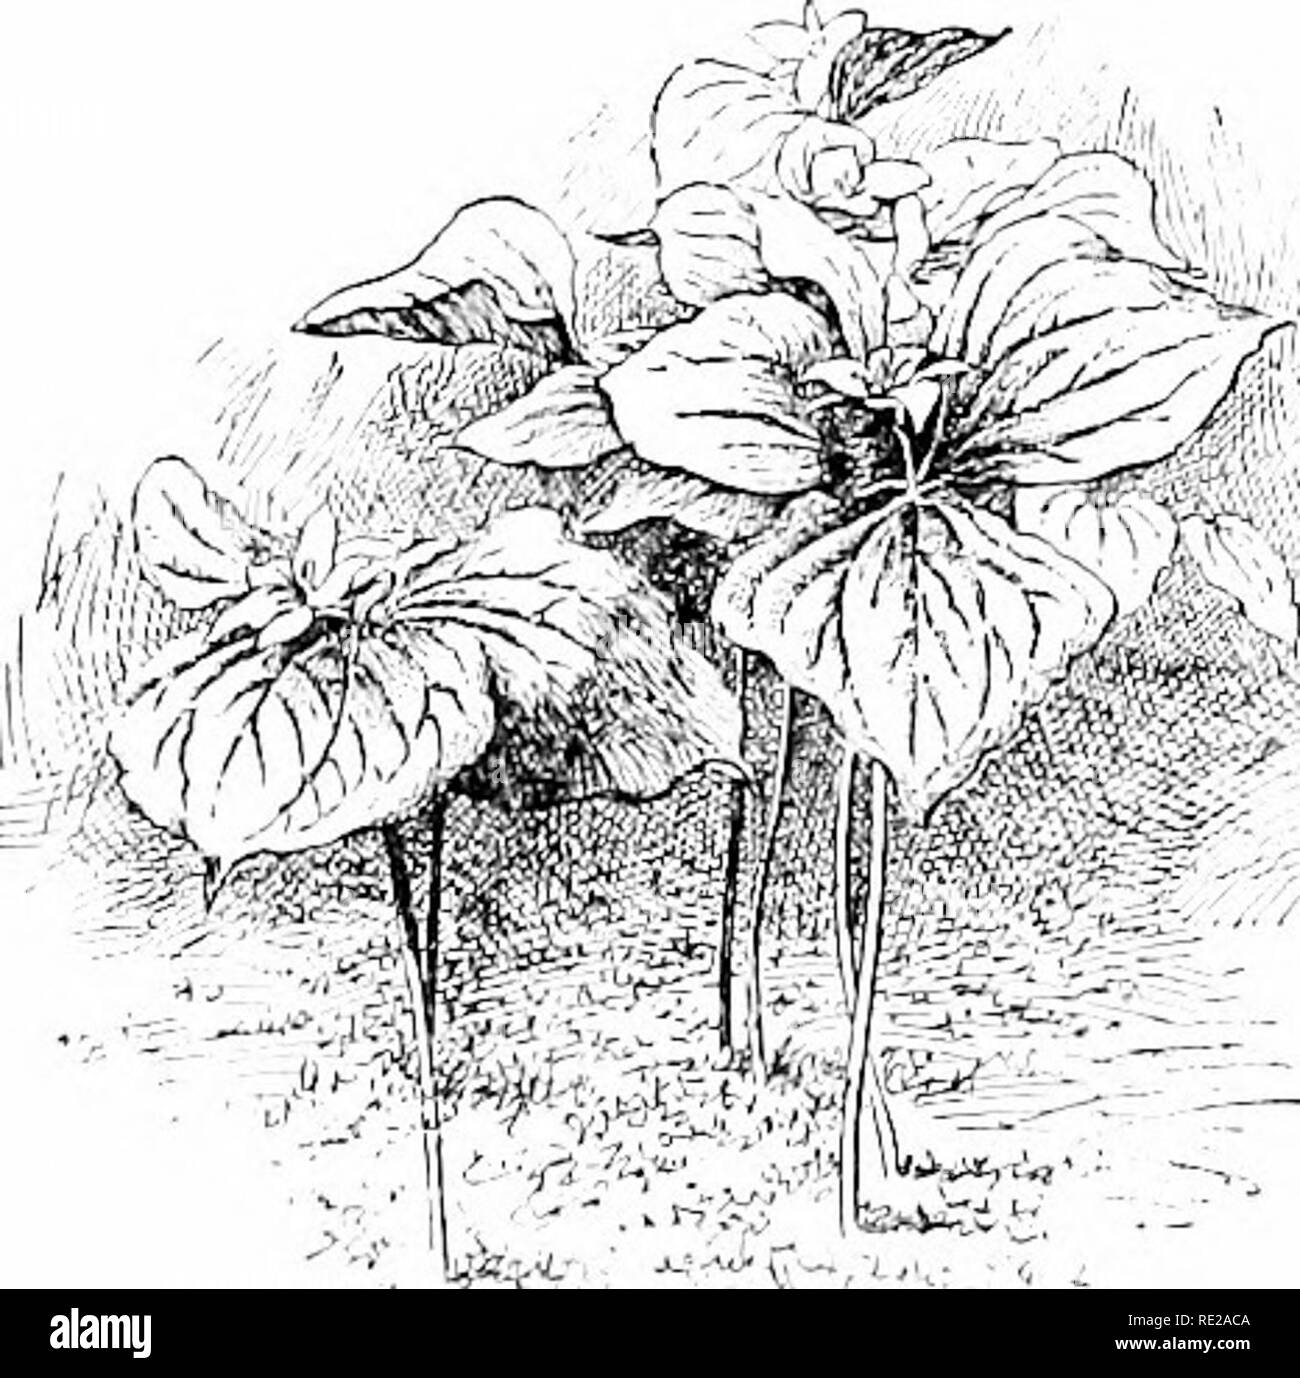 . Cyclopedia of American horticulture, comprising suggestions for cultivation of horticultural plants, descriptions of the species of fruits, vegetables, flowers, and ornamental plants sold in the United States and Canada, together with geographical and biographical sketches. Gardening. 2375. Trillium erectum (Xli). Sporting forms are not uncommon. Sometimes forms occur with petiolate Iv.s. A.G. 1892 :206. T. gnnidiflo- rnm is the best and handsomest species for cultivation. 8. ovS,tum, Pursh. Much like T. grandifl07-um, but the petals narrowdanceolate or narrow ovate, the sepals usually nearl Stock Photo